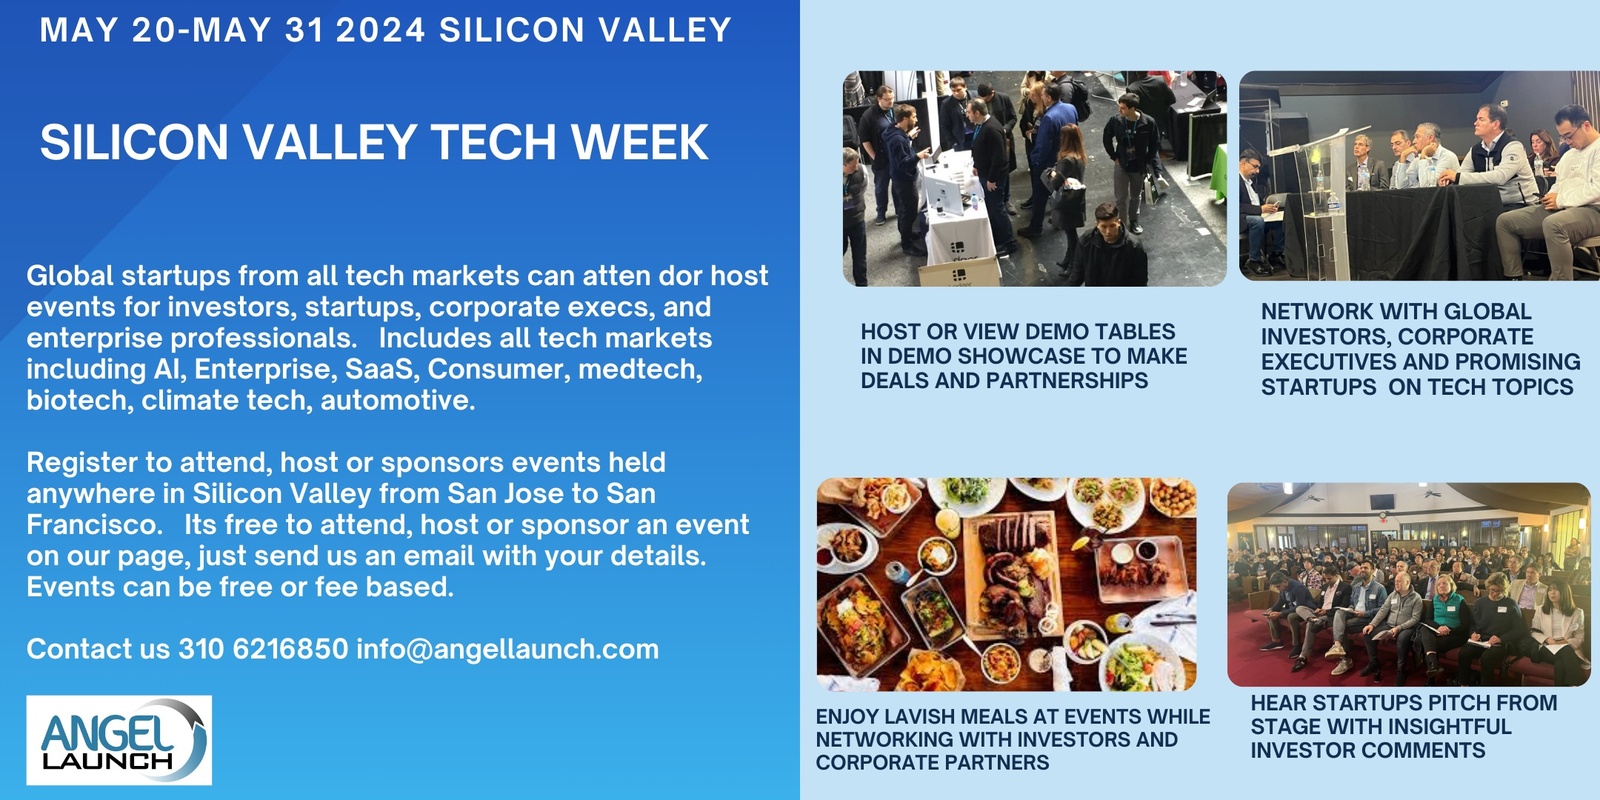 Banner image for SILICON VALLEY TECH WEEK